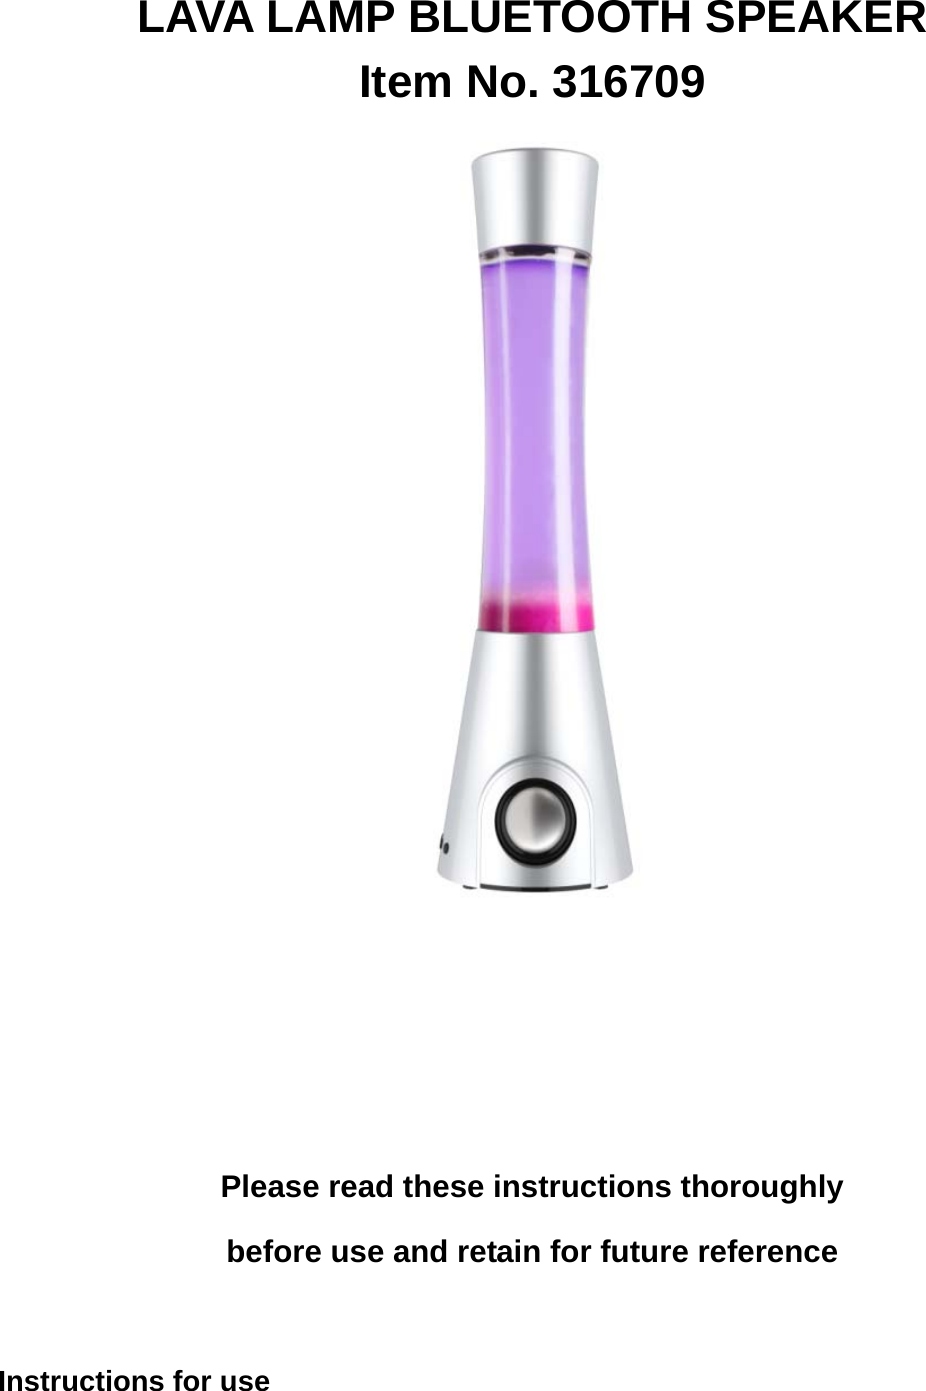     LAVA LAMP BLUETOOTH SPEAKER Item No. 316709      Please read these instructions thoroughly   before use and retain for future reference  Instructions for use                                                     